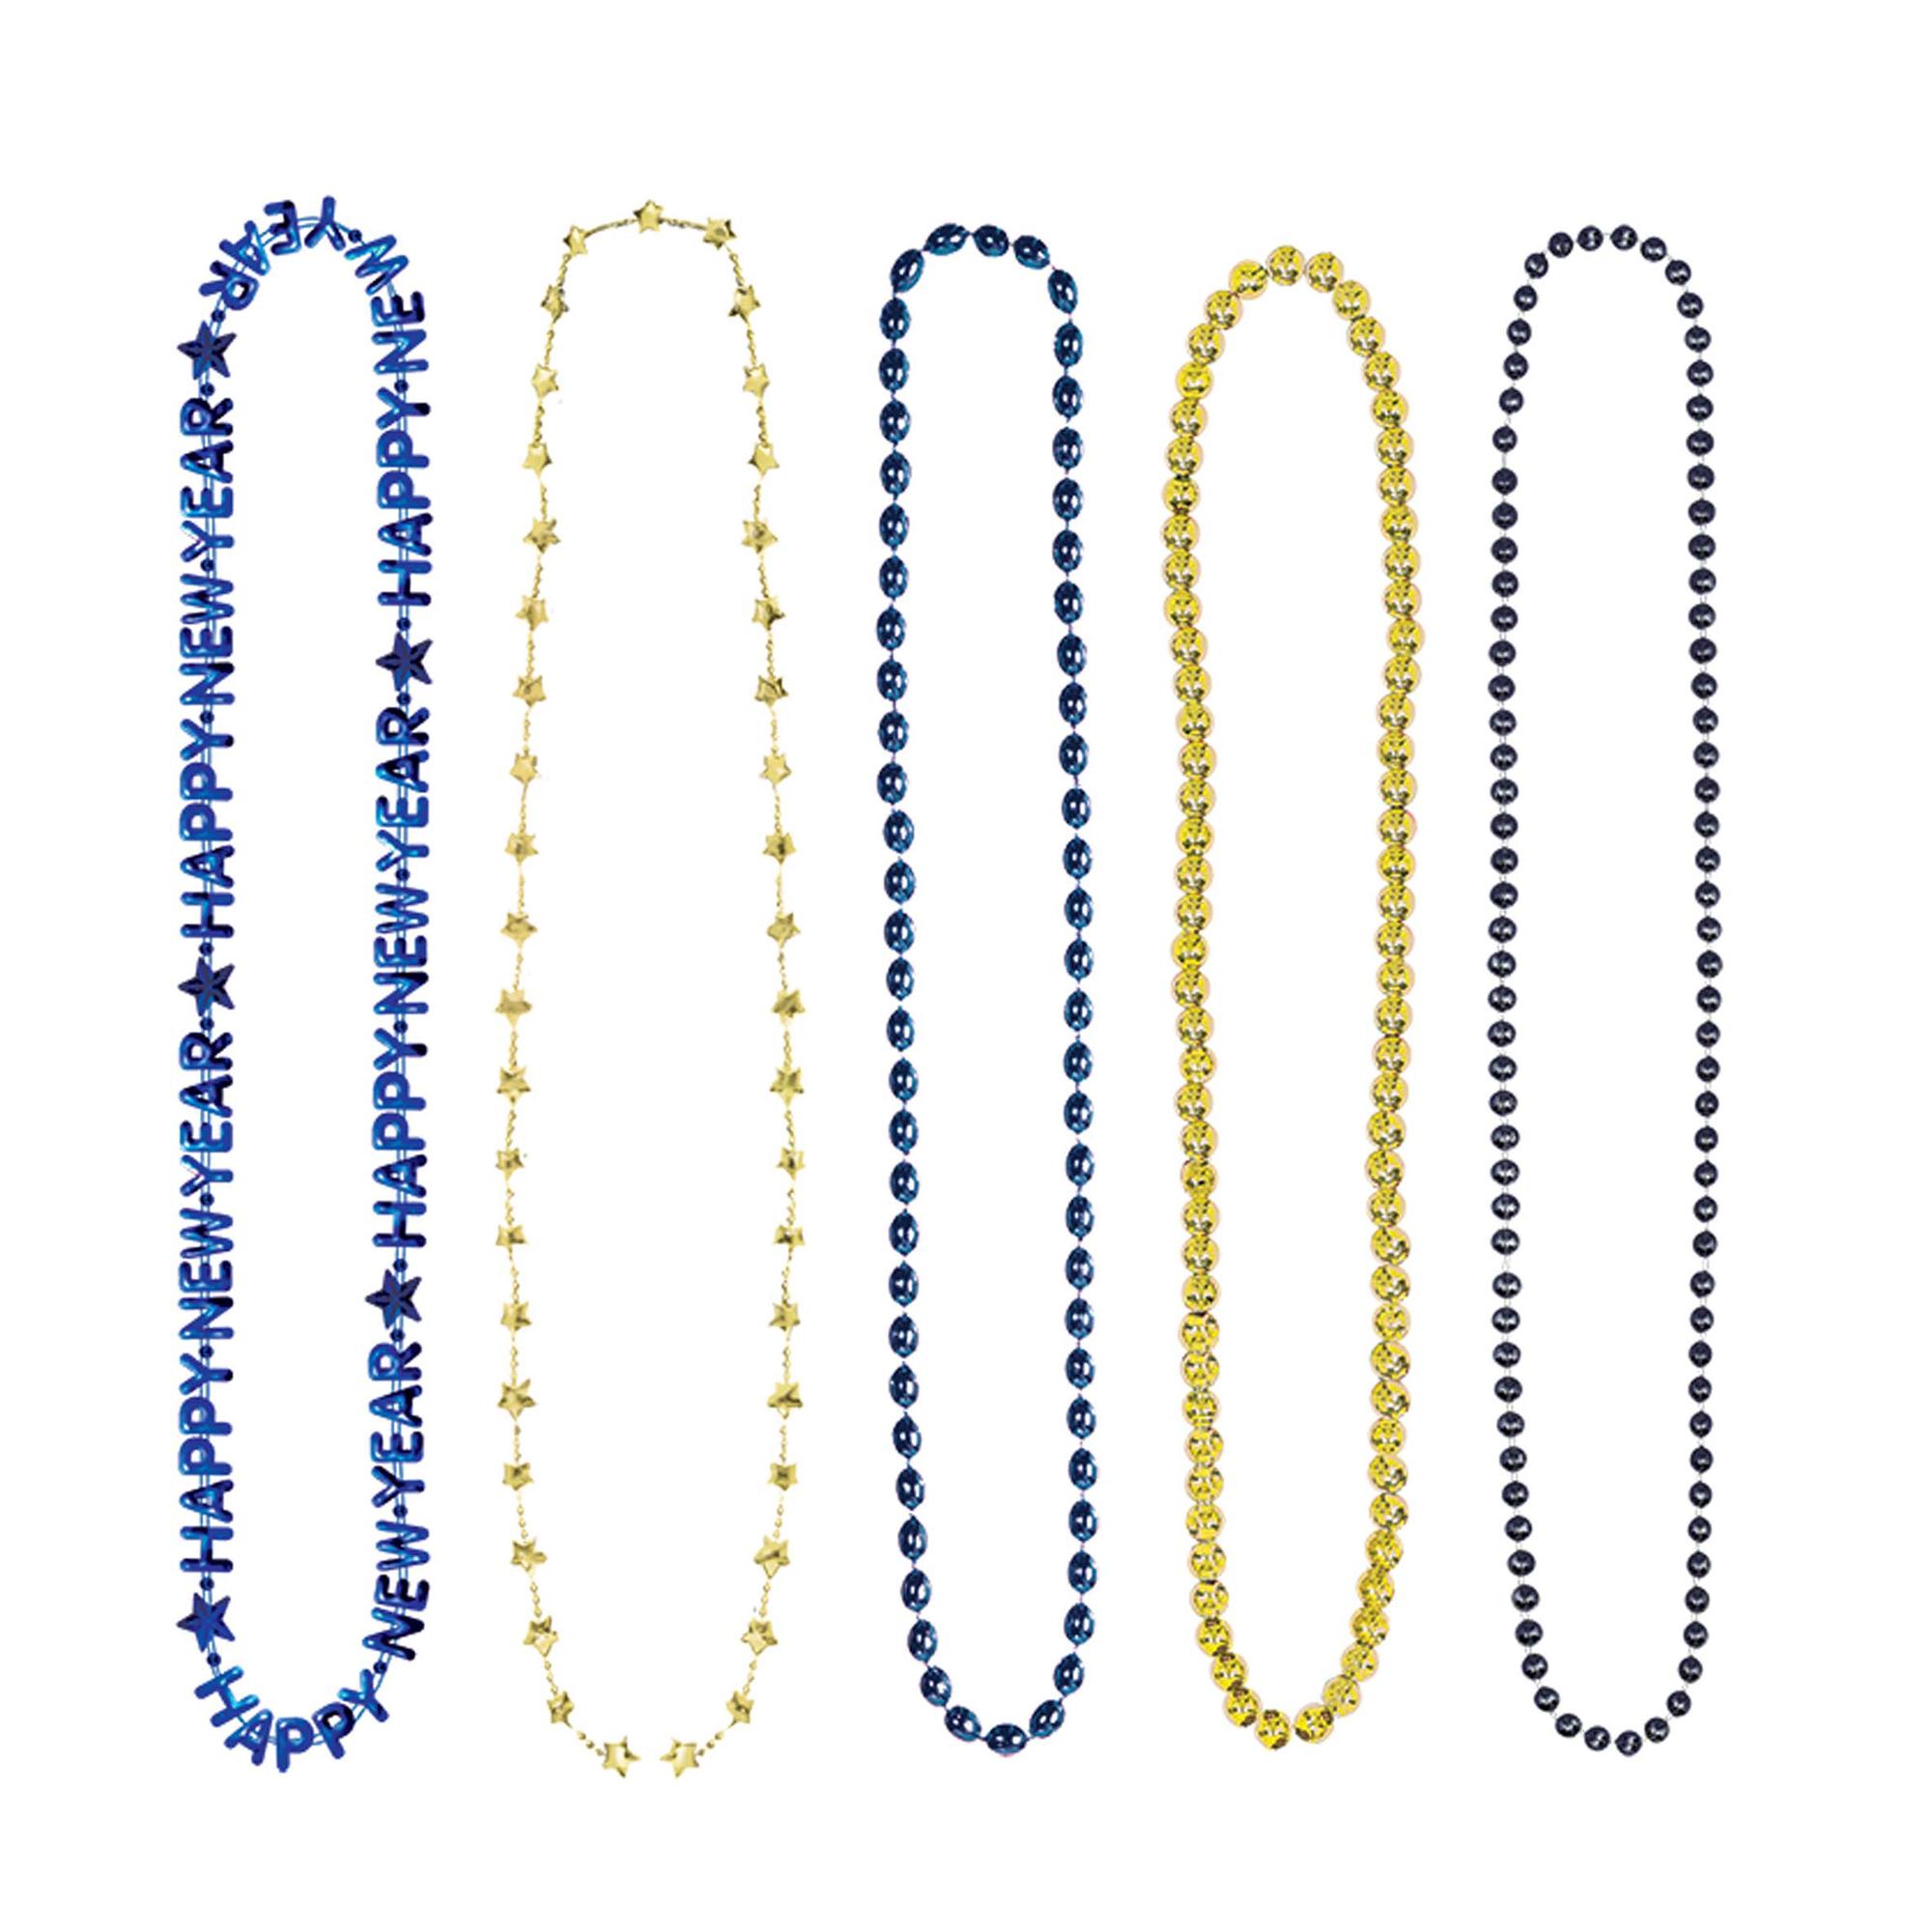 Midnight Beads Happy New Year Multi Pack Costumes & Apparel - Party Centre